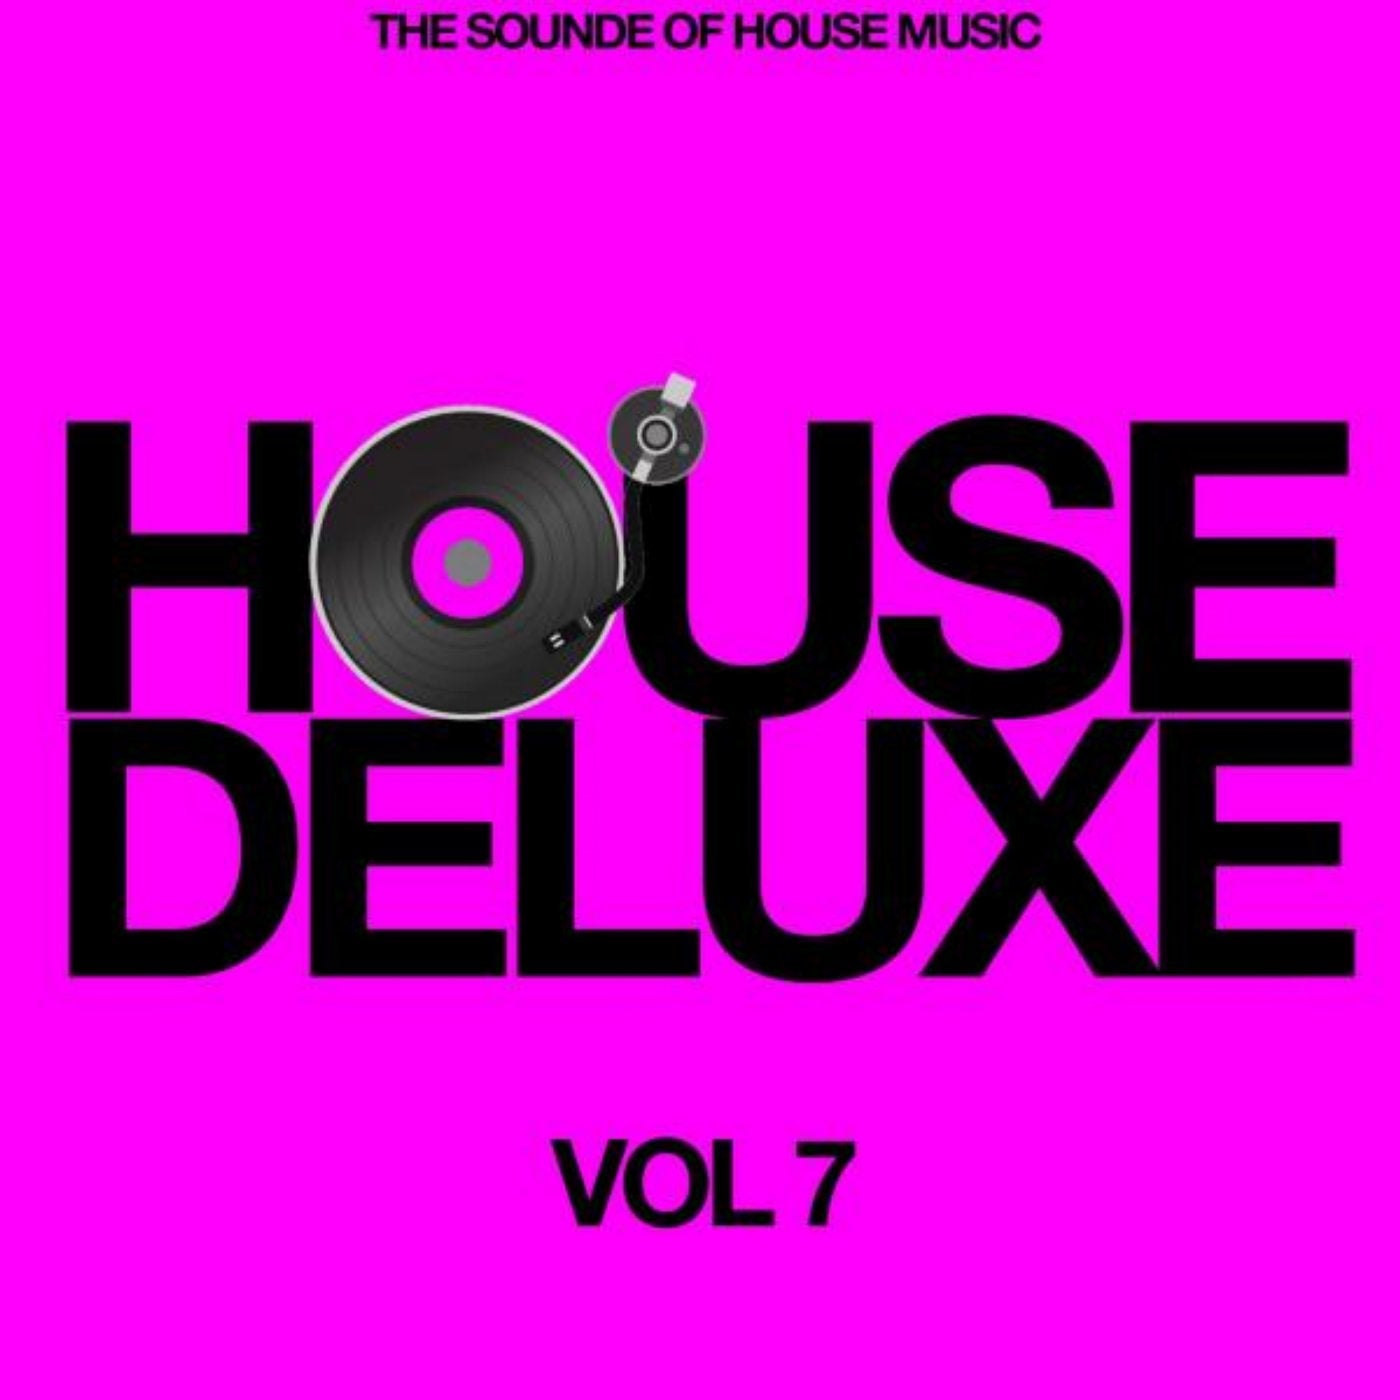 House Deluxe, Vol. 7 (The Sound of House Music)